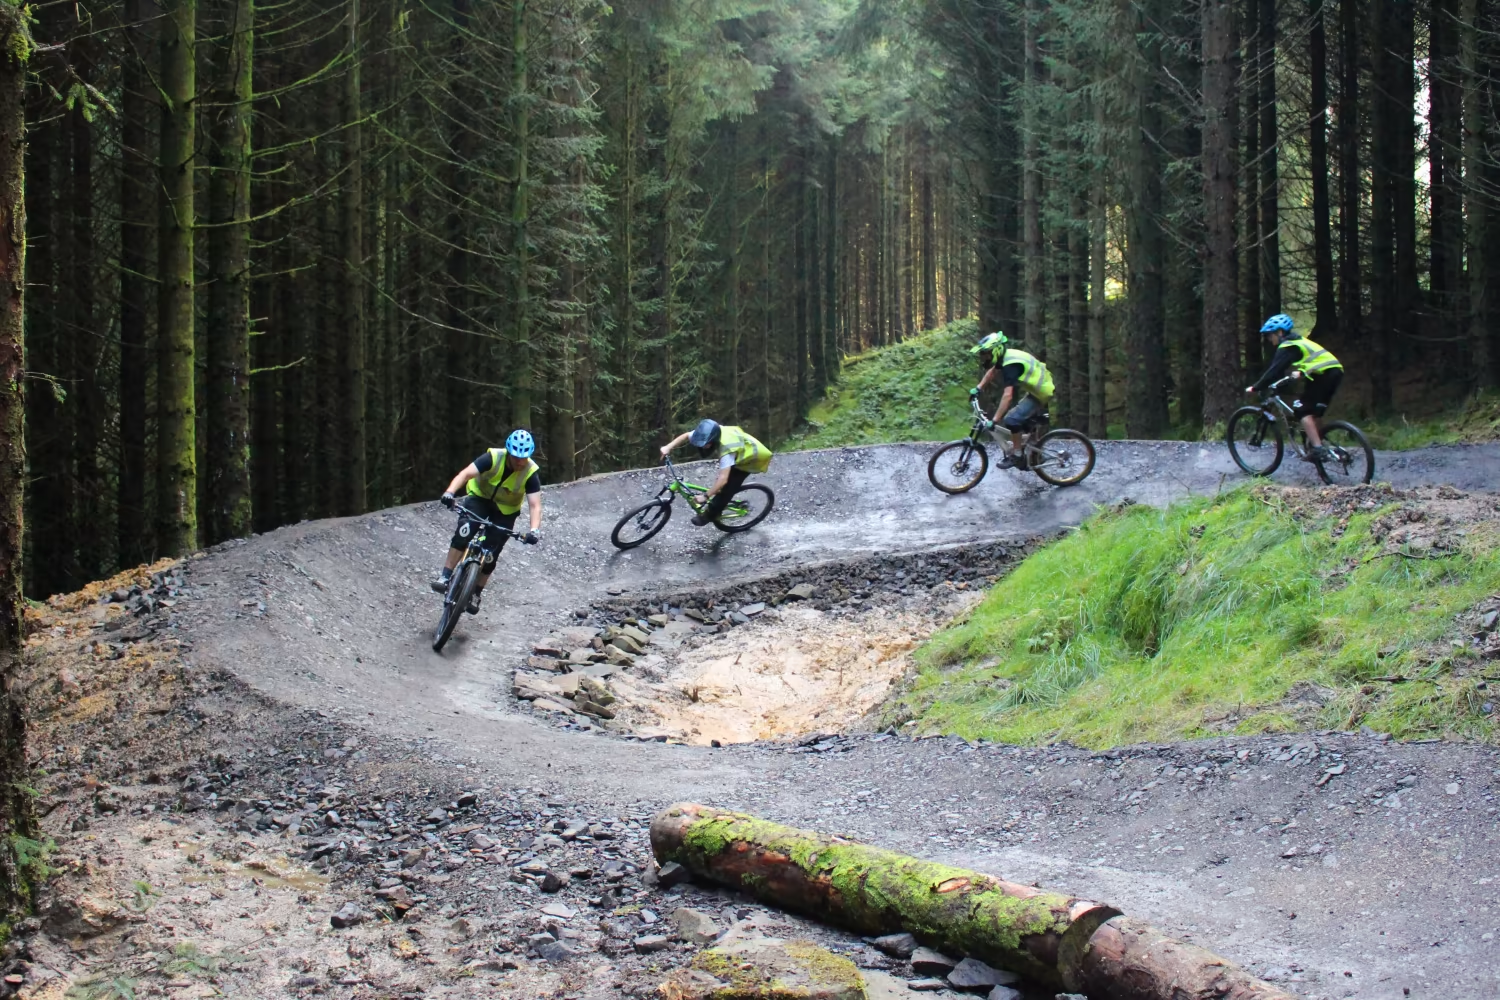 As a beginner rider, try riding in a bike park which would be a good place to practice mountain biking skills.